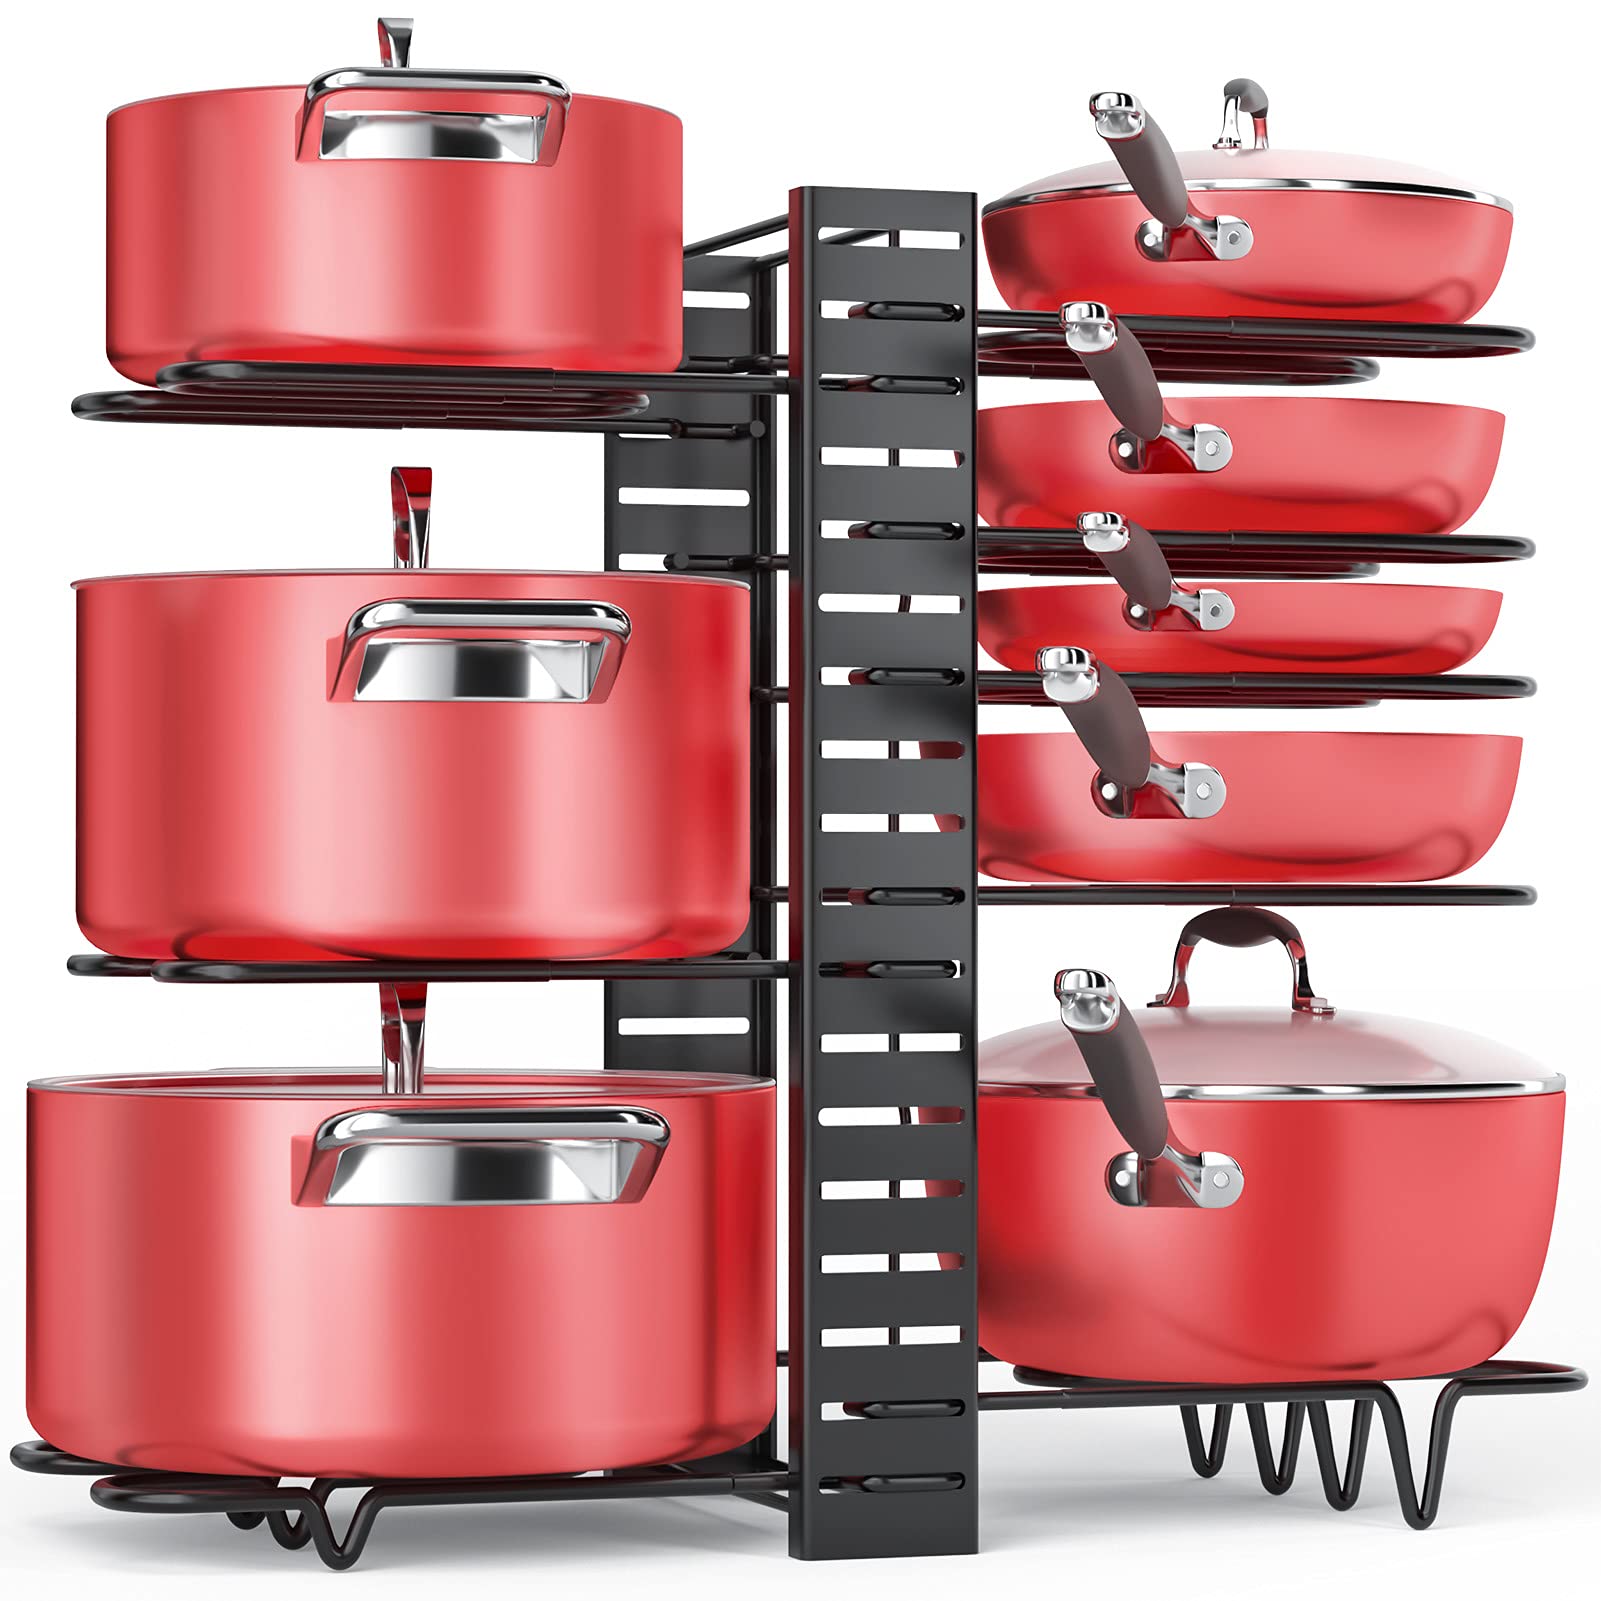 Pots and Pans Organizer, 8 Tier Pan Organizer Rack for Cabinet,Heavy Duty  Pot